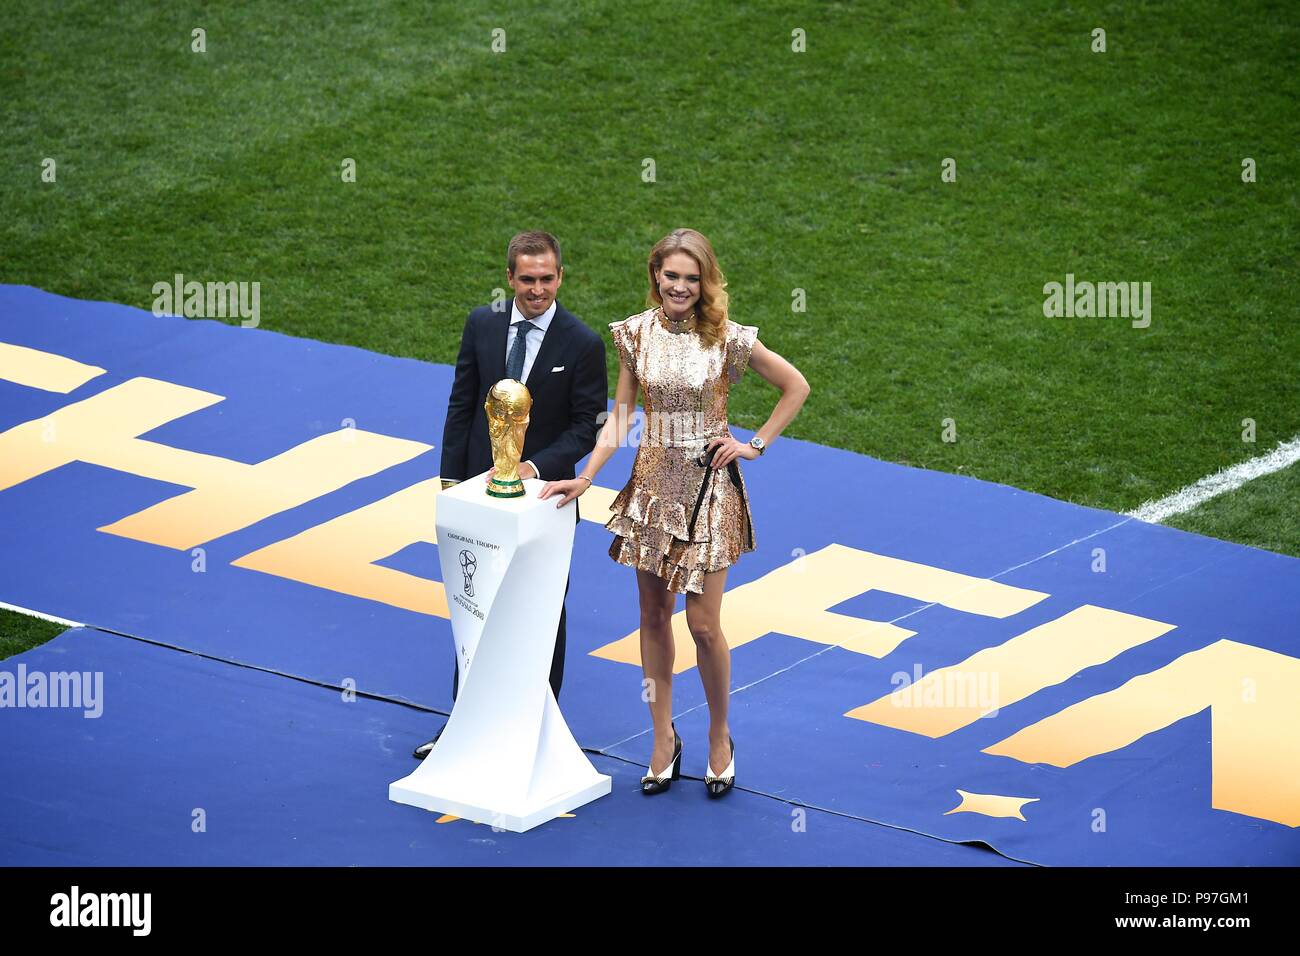 Moscow, Russia. July 15th, 2018,   Former German footballer Philipp Lahm (L)  and Russian model Natalia Vodianova present the World Cup trophy during the closing ceremony before the FIFA World Cup 2018 final match between France and Croatia at Luzhniki  stadium, Moscow. Shoja Lak/Alamy Live News. Stock Photo